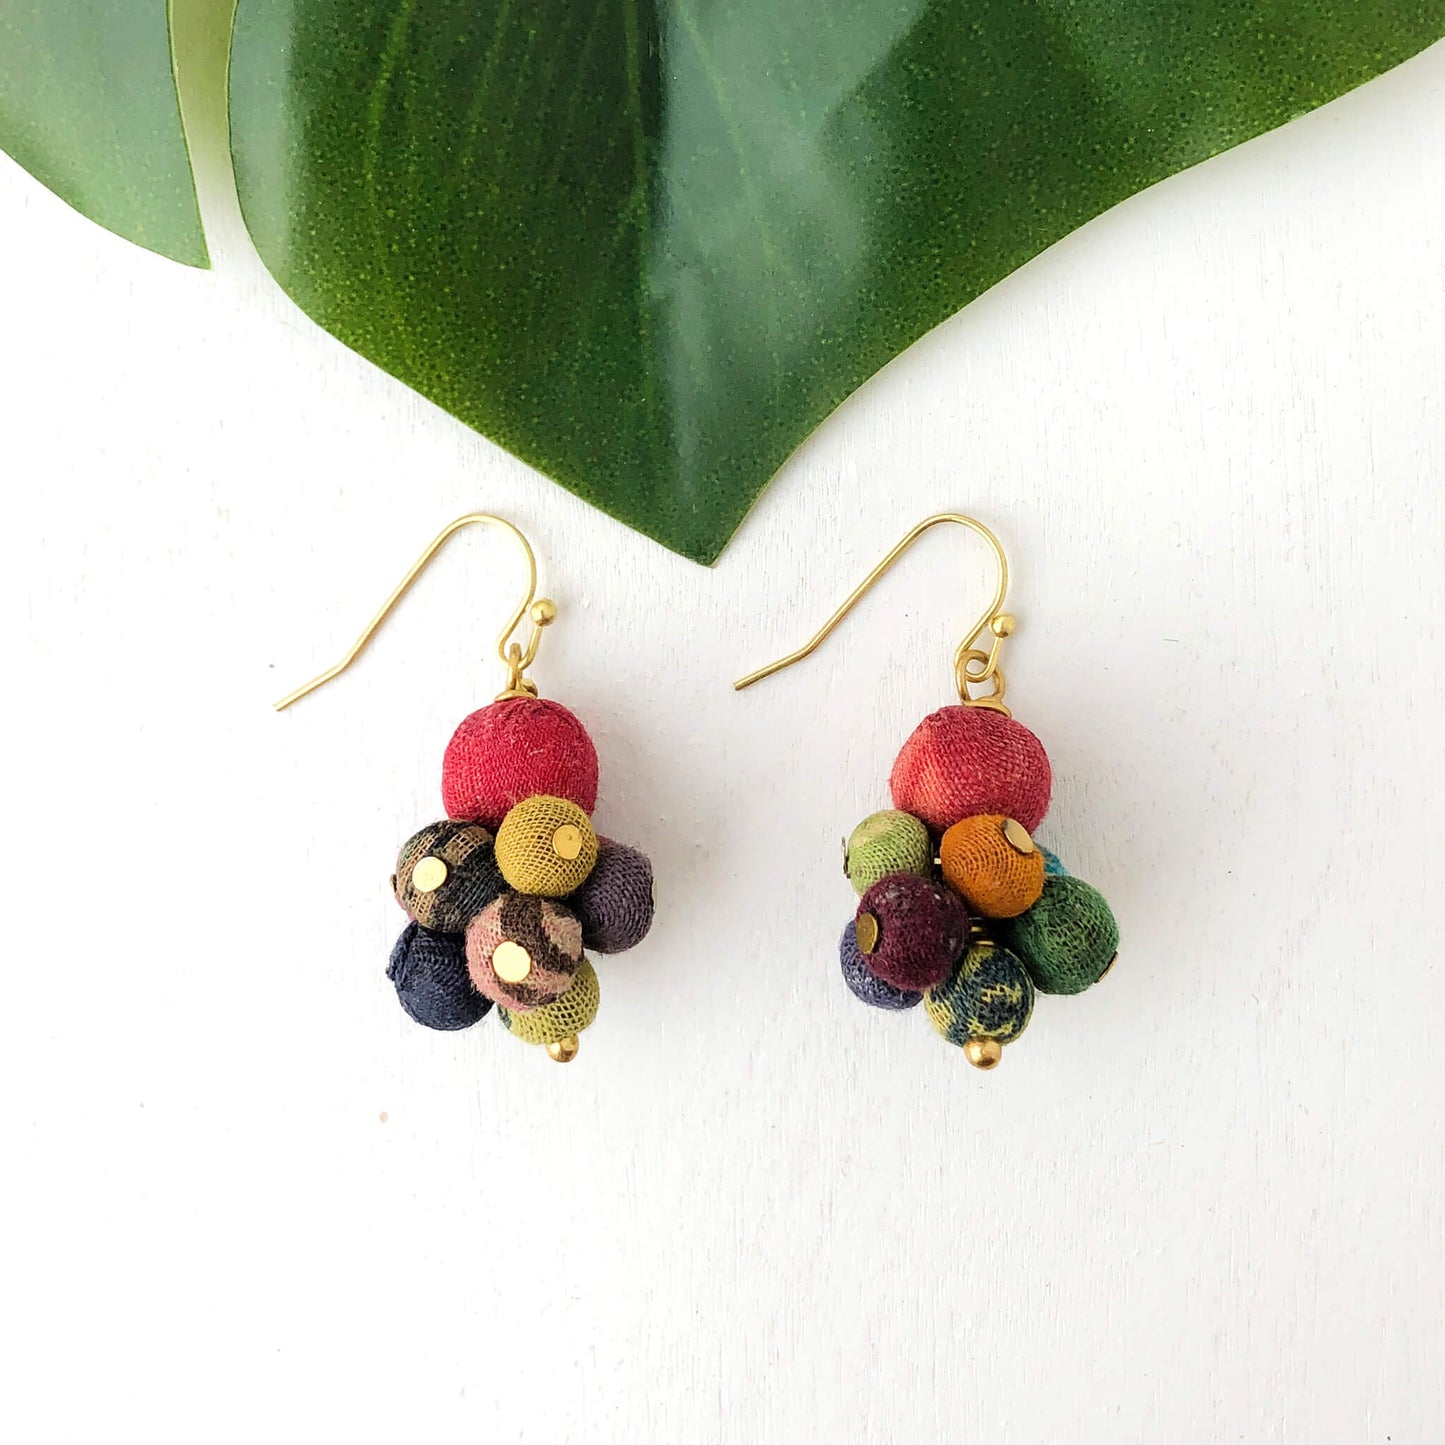 Load image into Gallery viewer, A bundle of small colorful textile-wrapped beads dangles from a larger bead to form these earrings.
